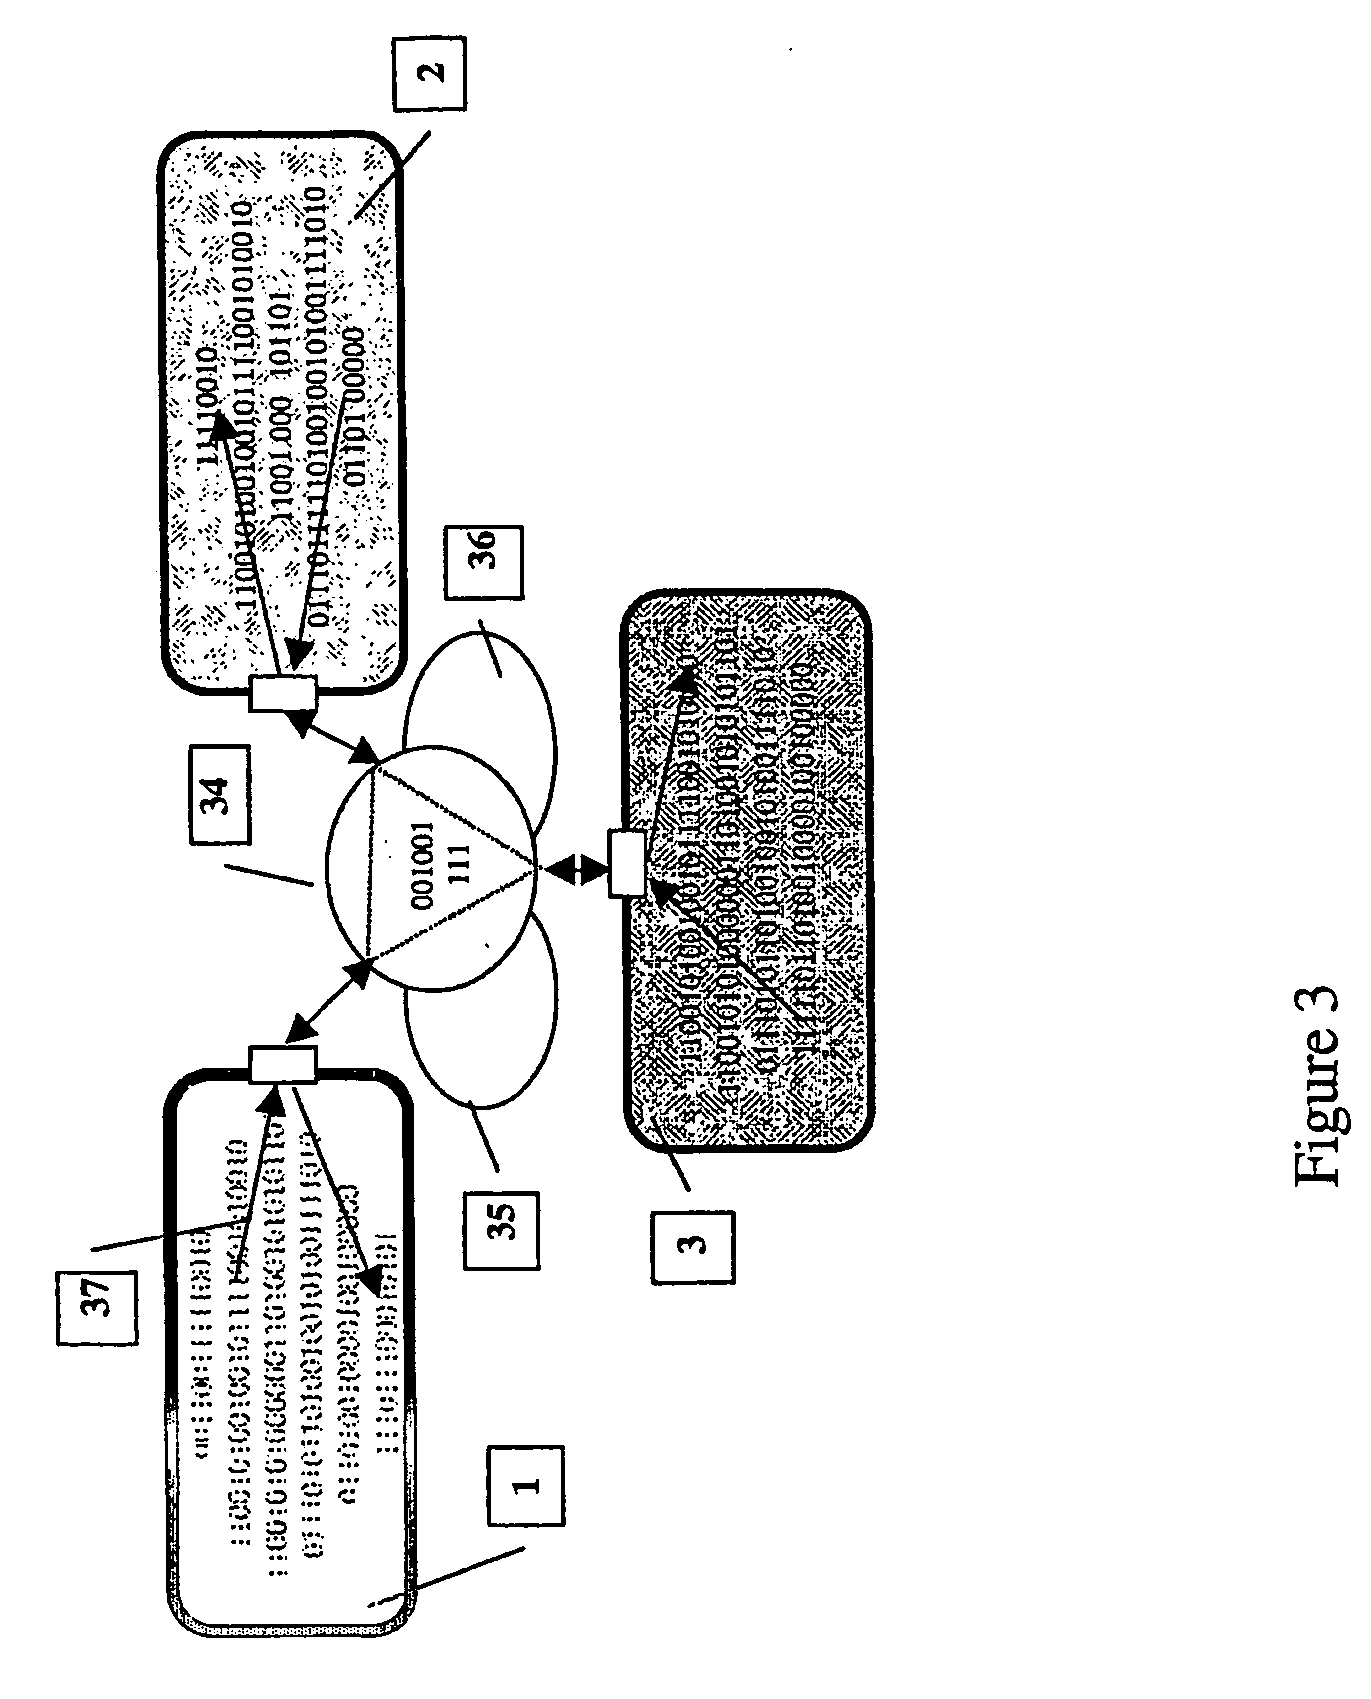 Method of managing software components that are integrated into an embedded system